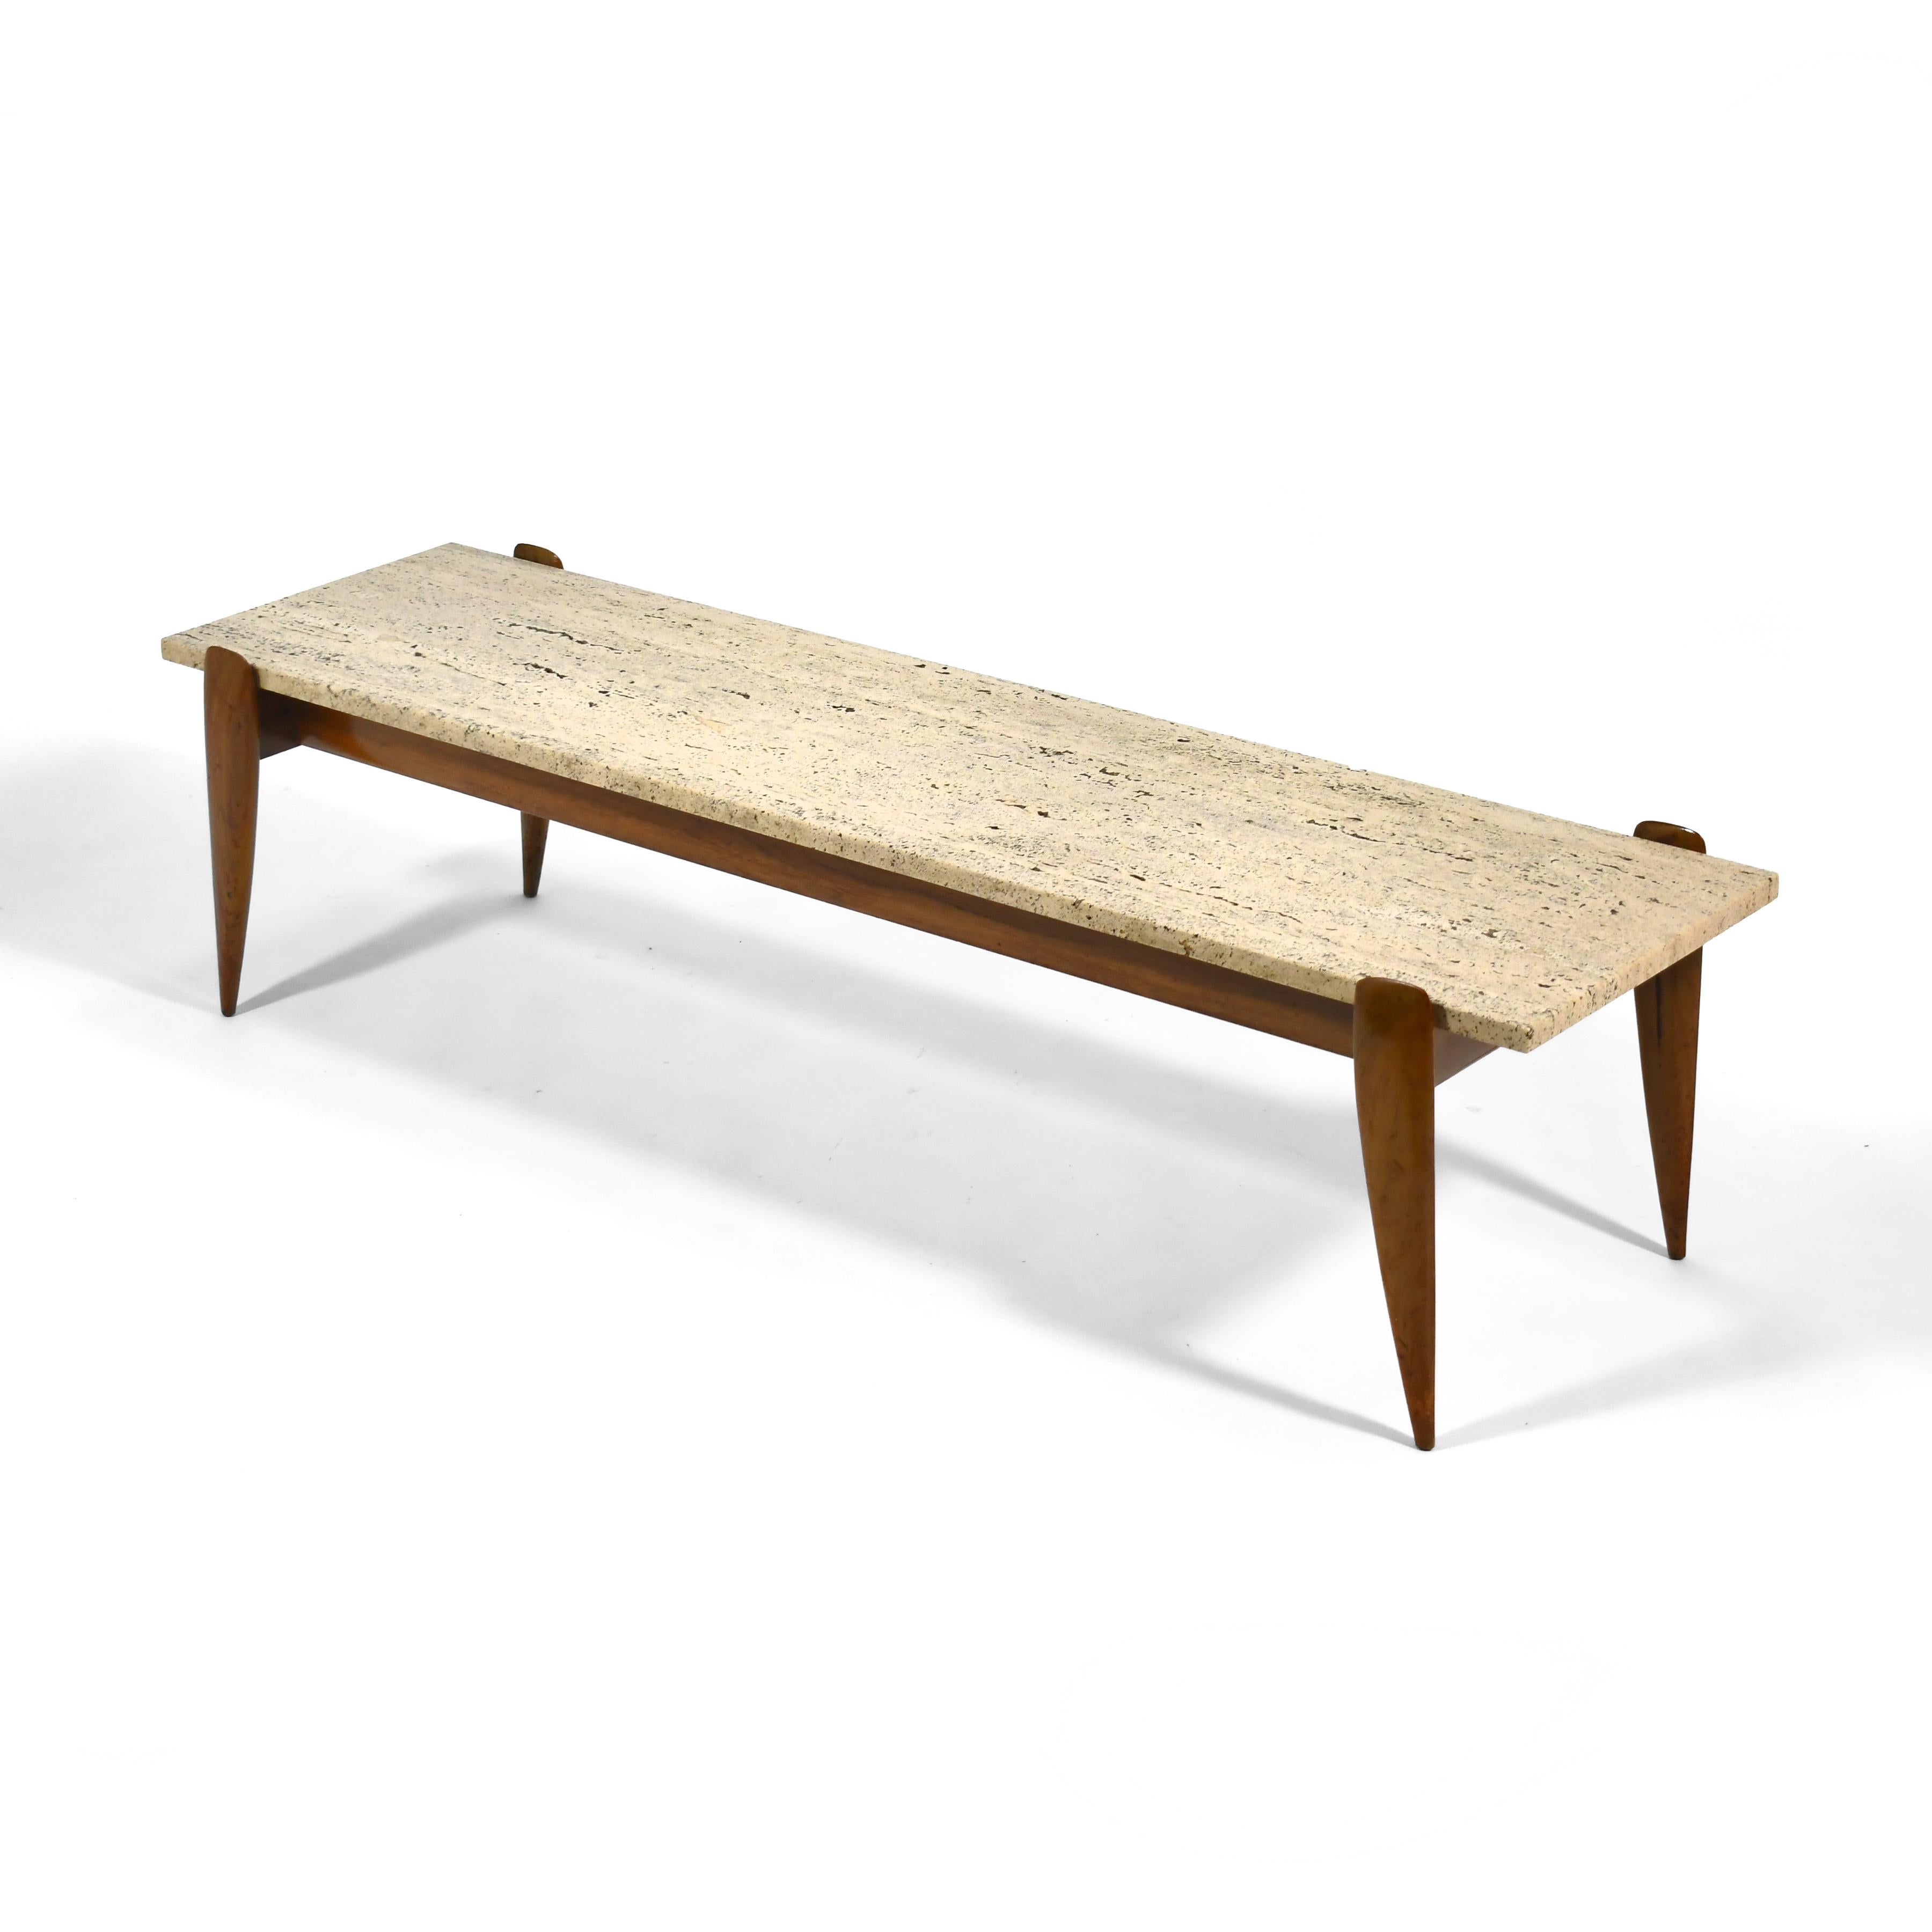 Sublime mid-century Italian design at its best, this coffee table by Gio Ponti by Singer & Son features a stunning piece of travertine marble supported by an Italian walnut base with elegantly sculpted legs. Acquired directly from the original